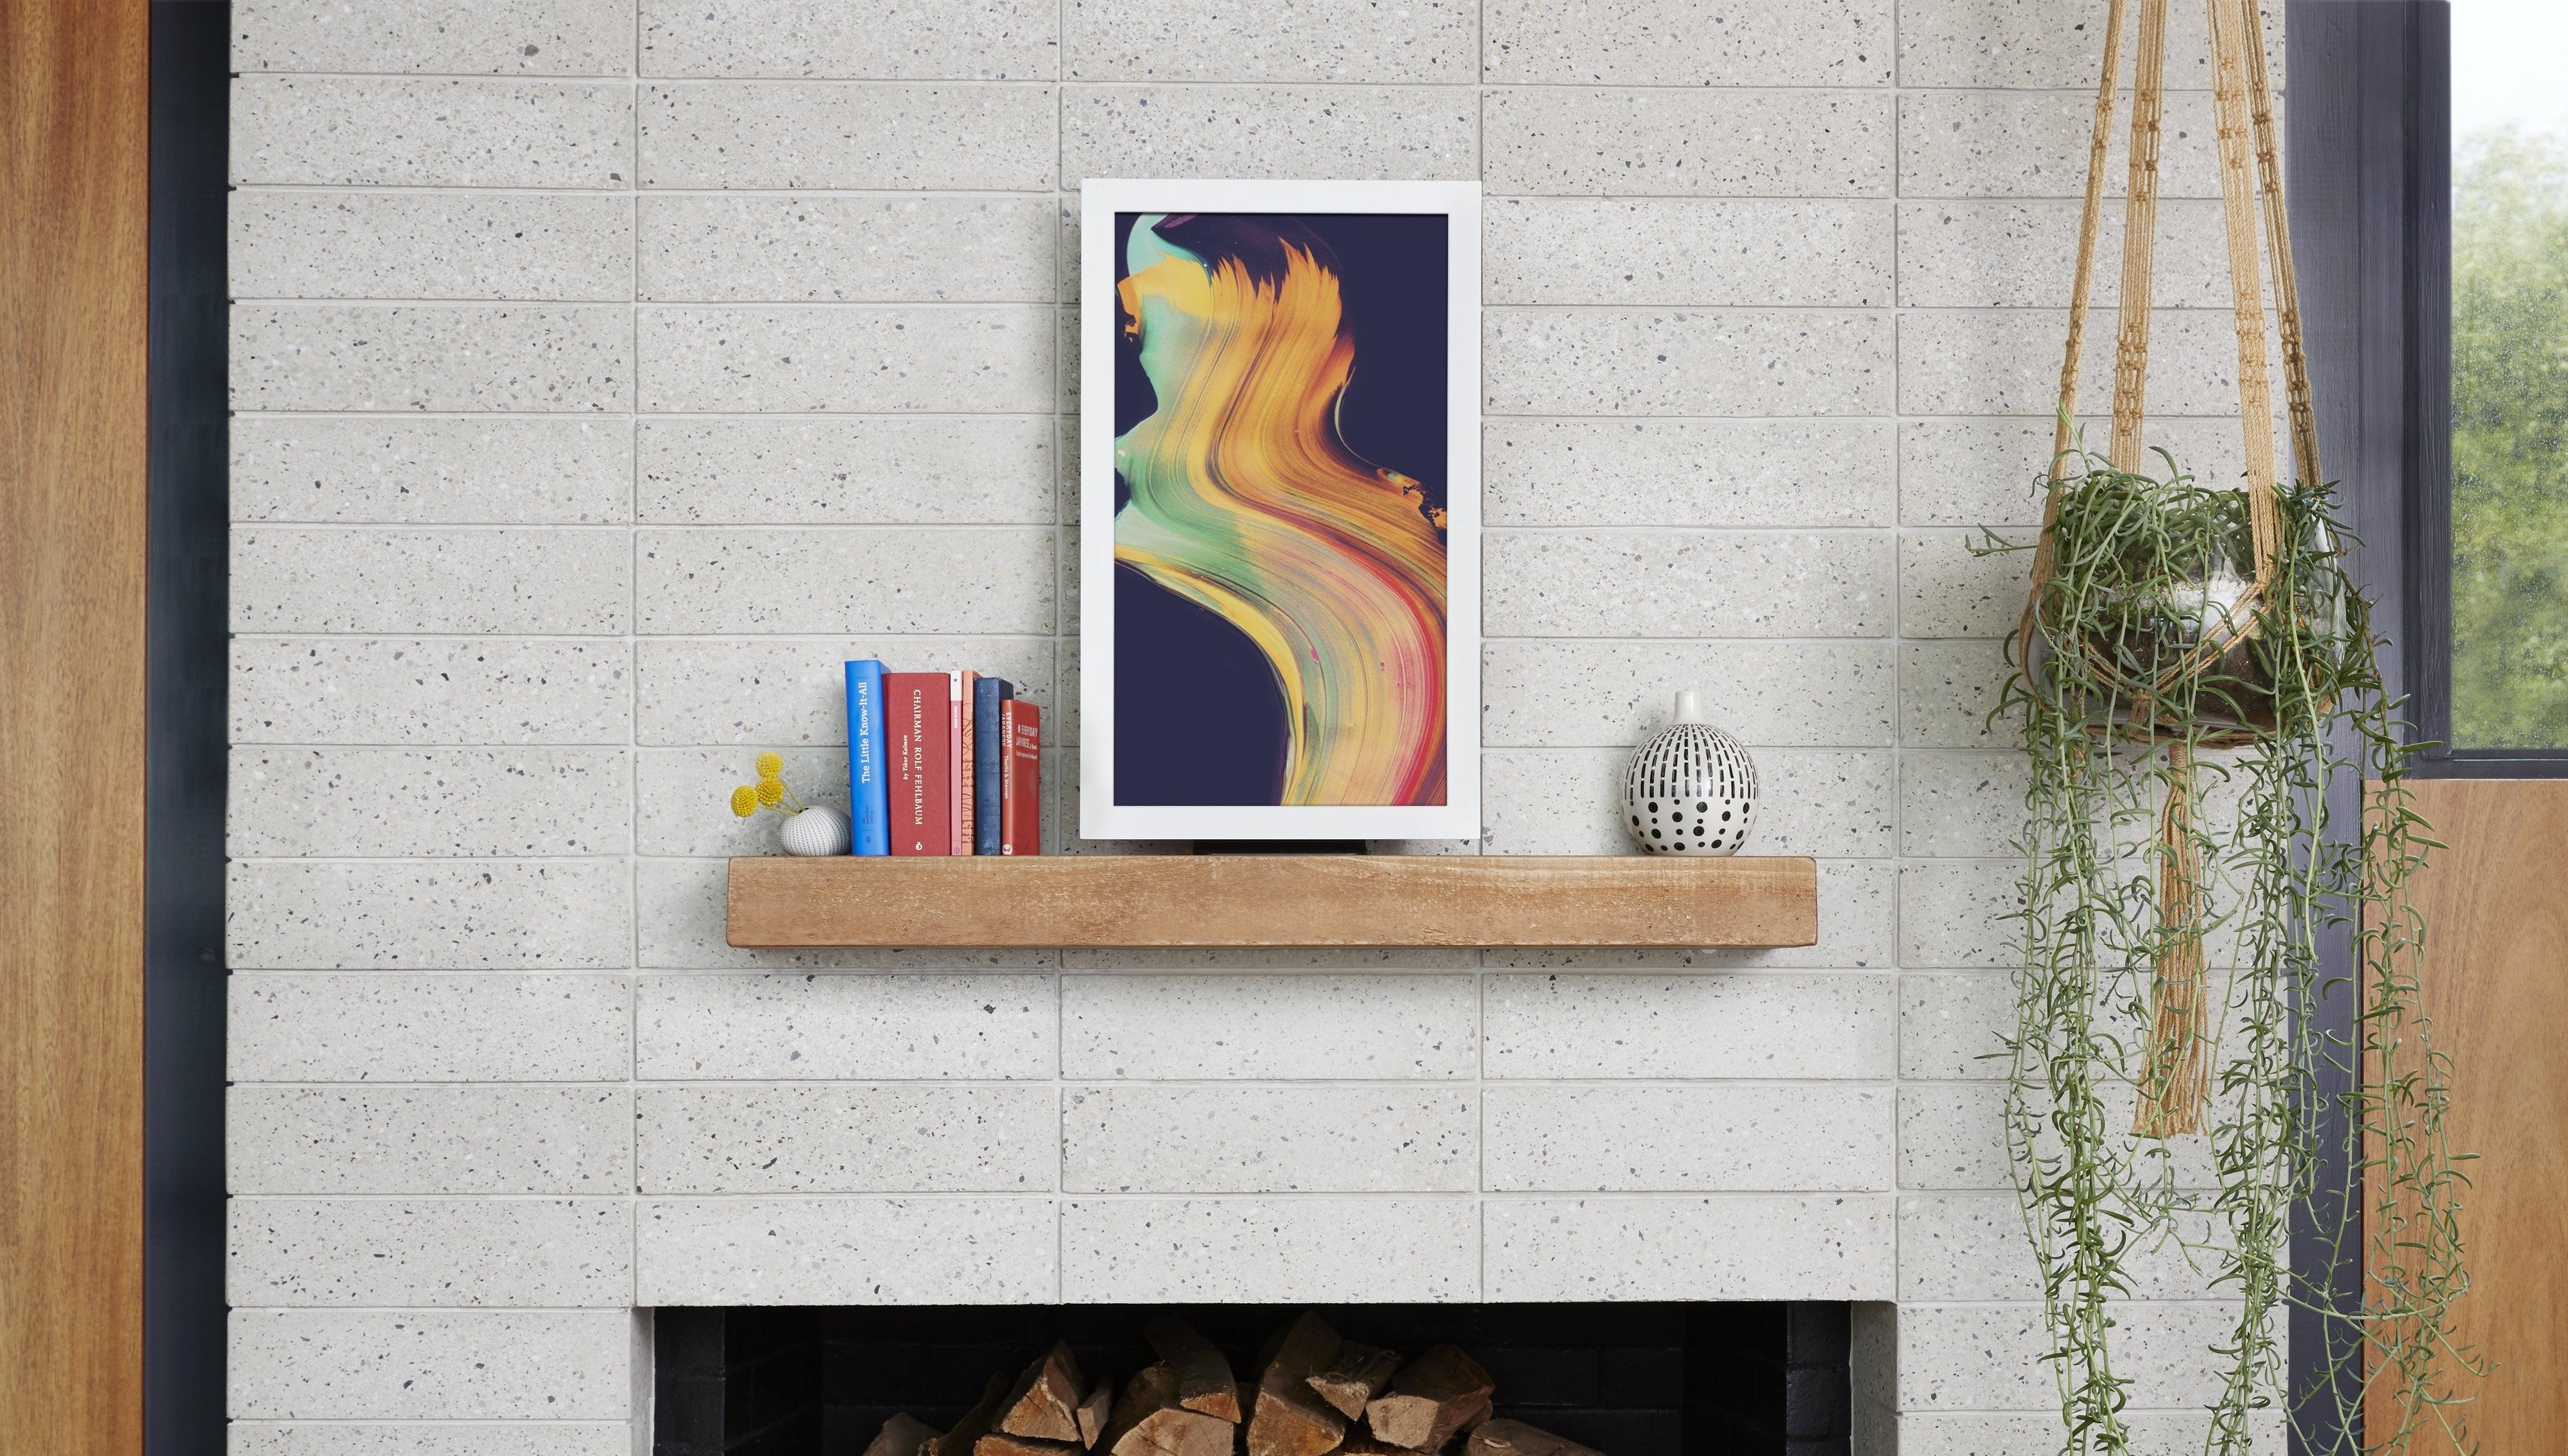 3 Digital Art Frames To Display The Classics And Your Instagram Inside 2018 Instagram Wall Art (View 19 of 20)